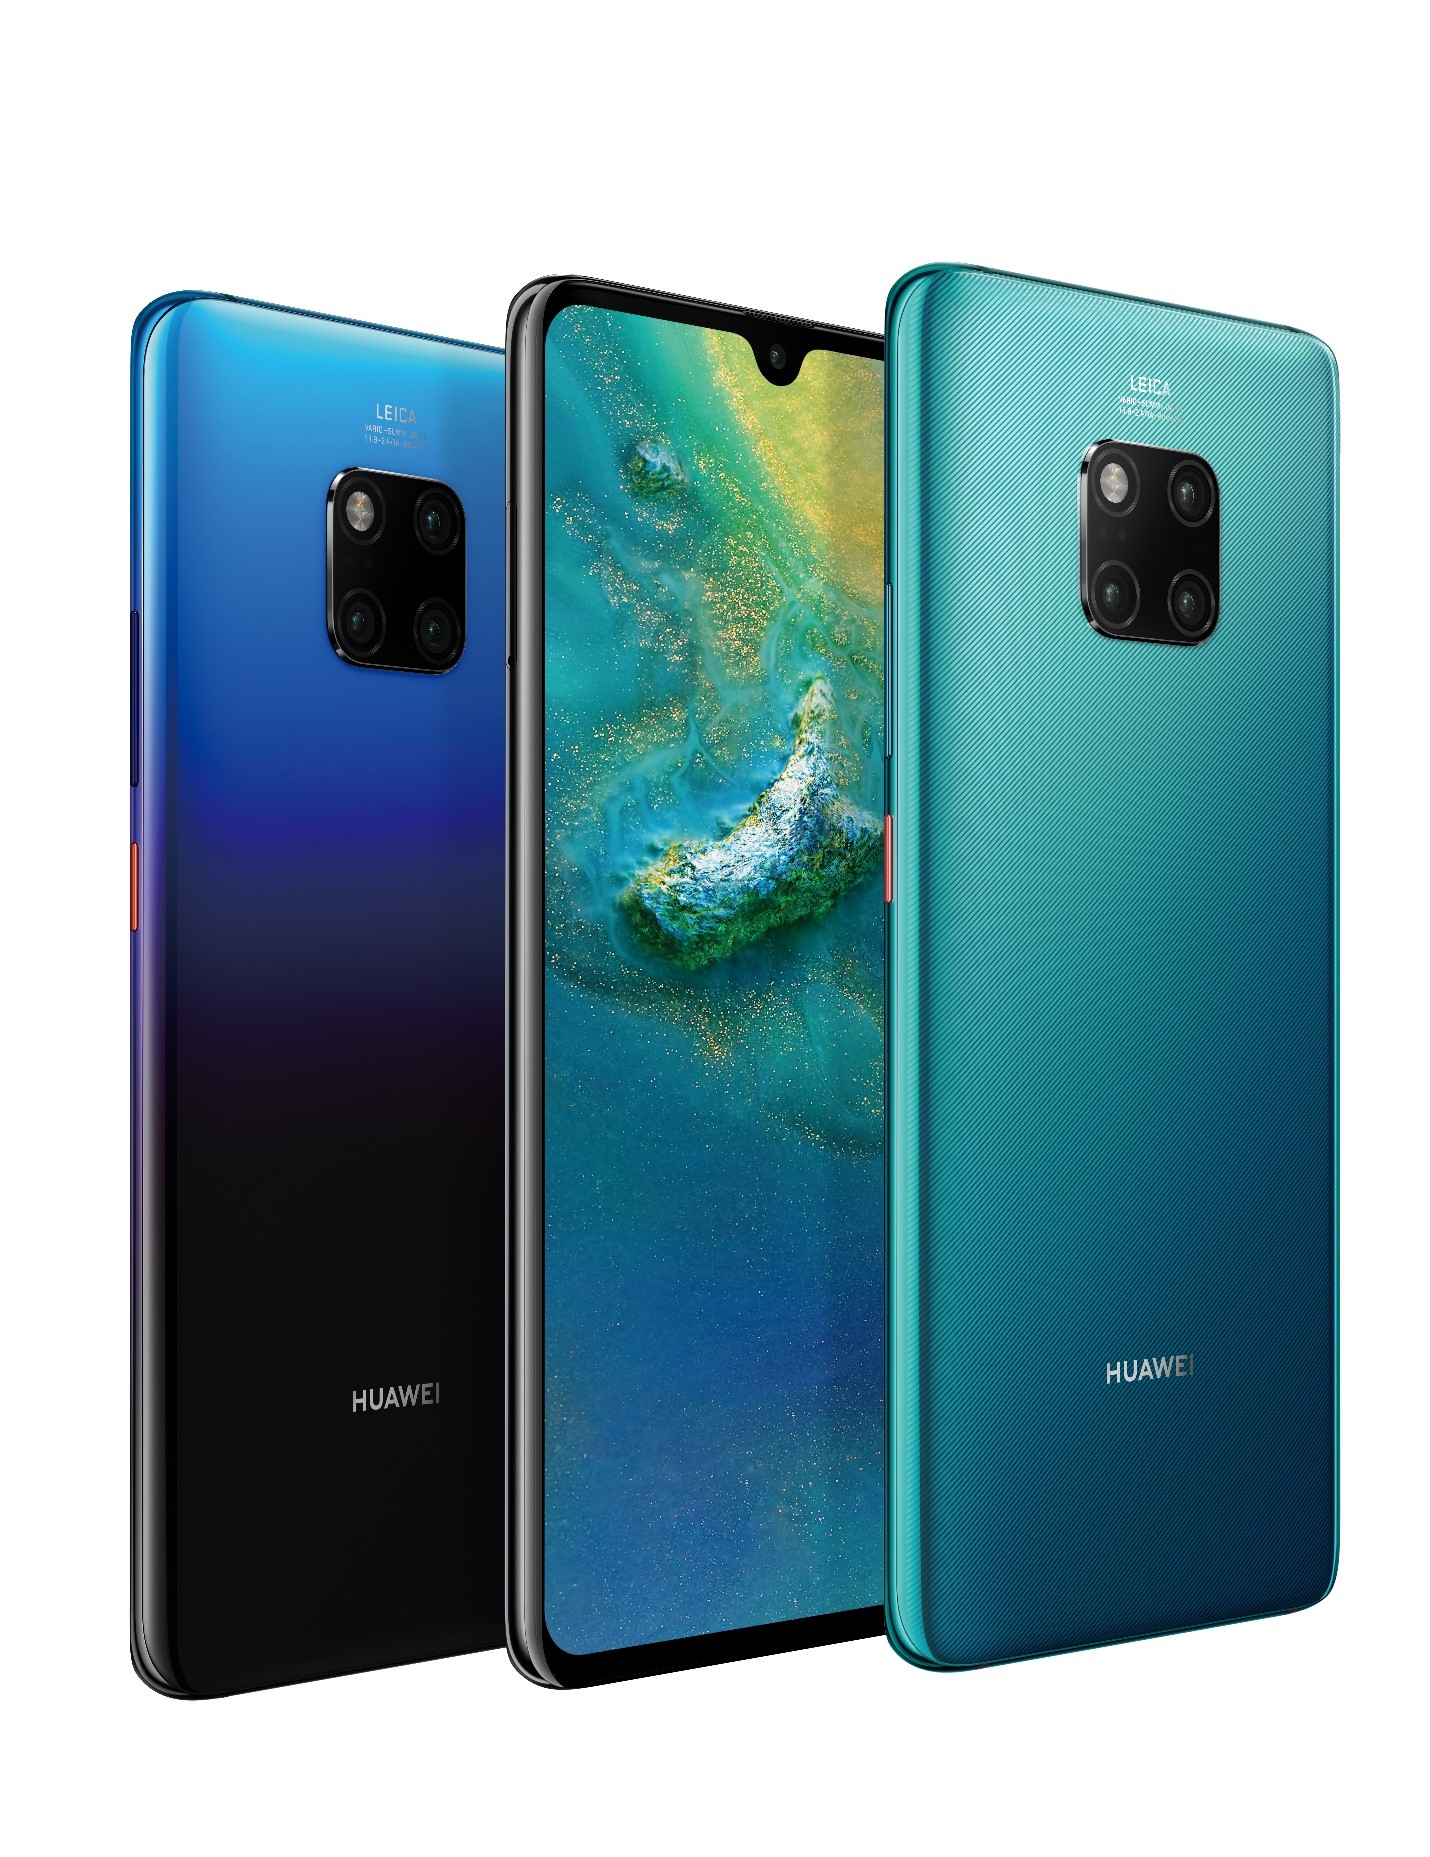 MATE 20 PRO NOW BACK IN STOCK ACROSS QATAR